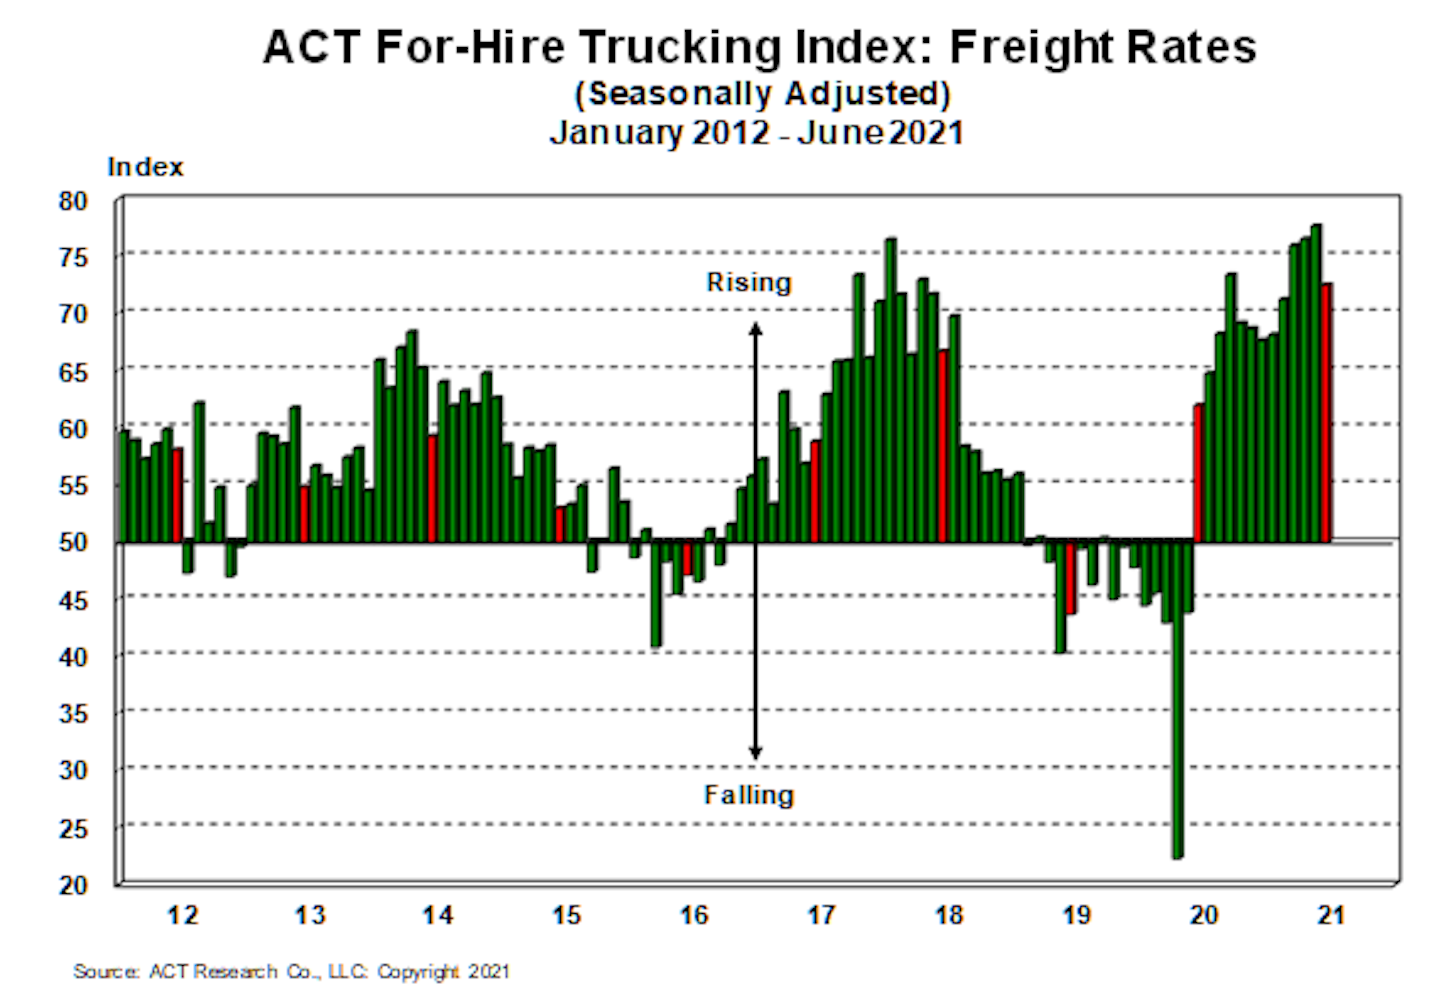 Freight rates dropped in June for the first time in several months, but levels remain high.